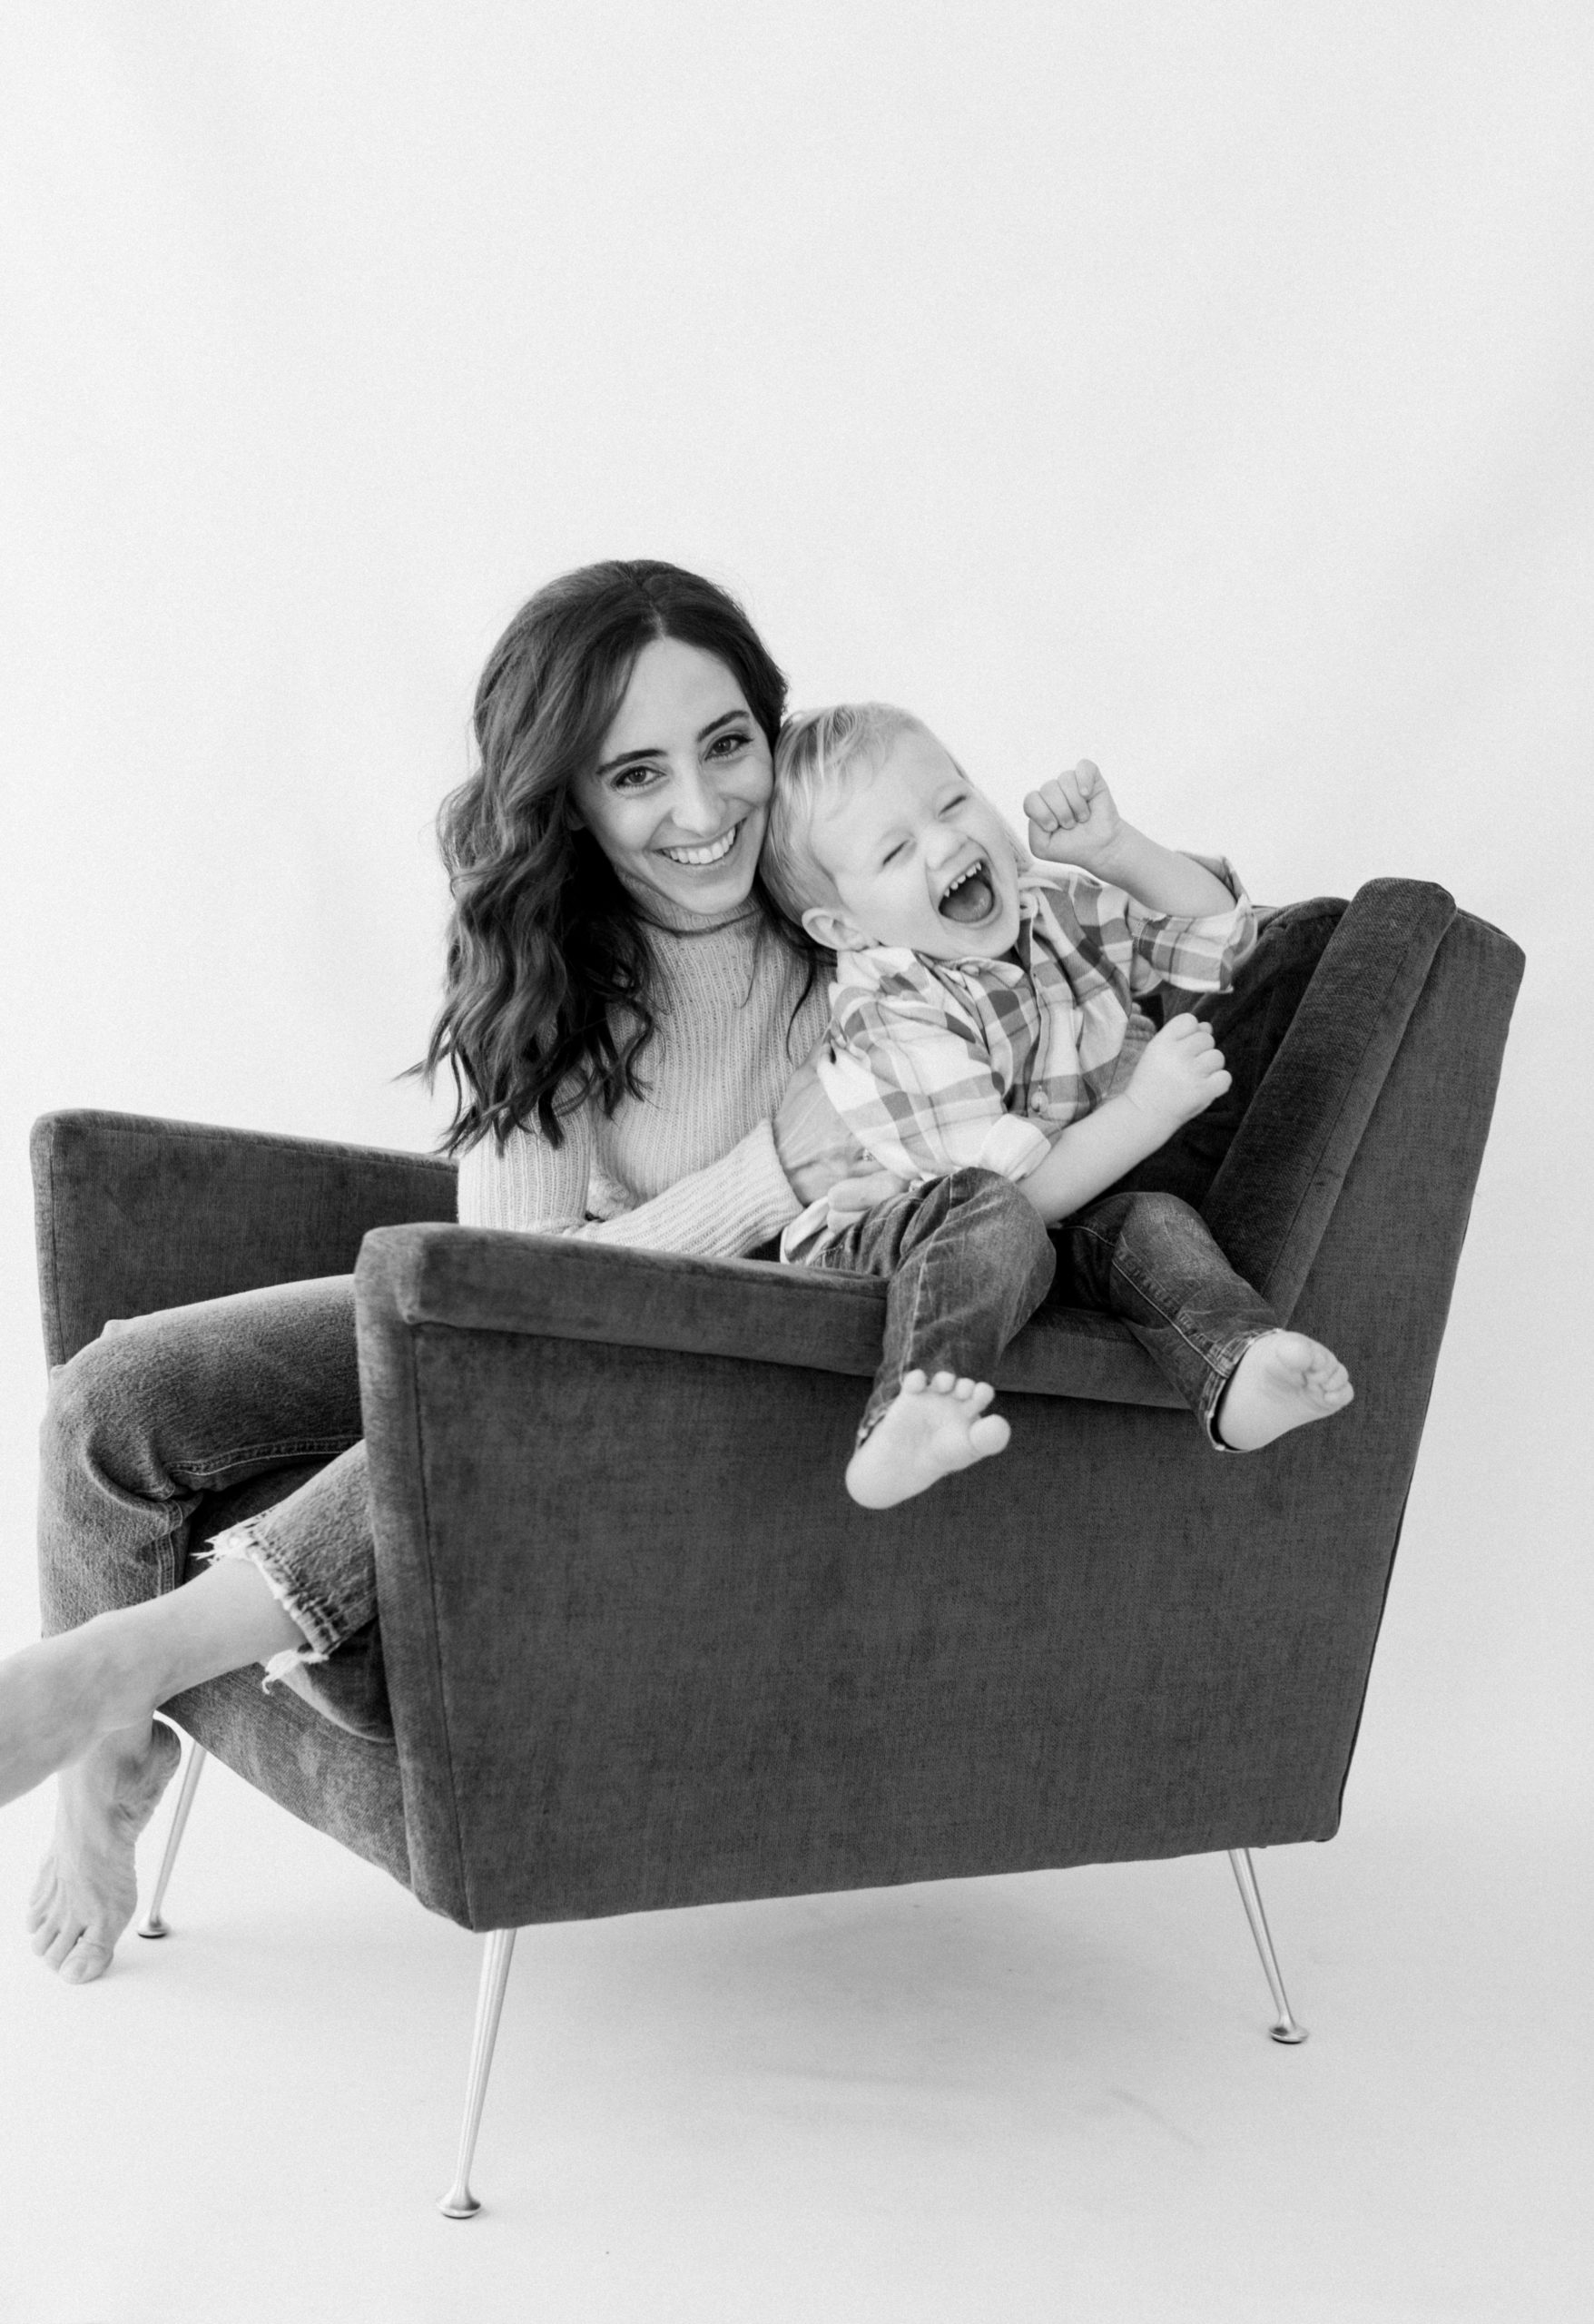 black and white photo of mama and baby boy sitting on velvet sofa chair. Little boy wearing jeans and plaid shirt. Mama tickling son.